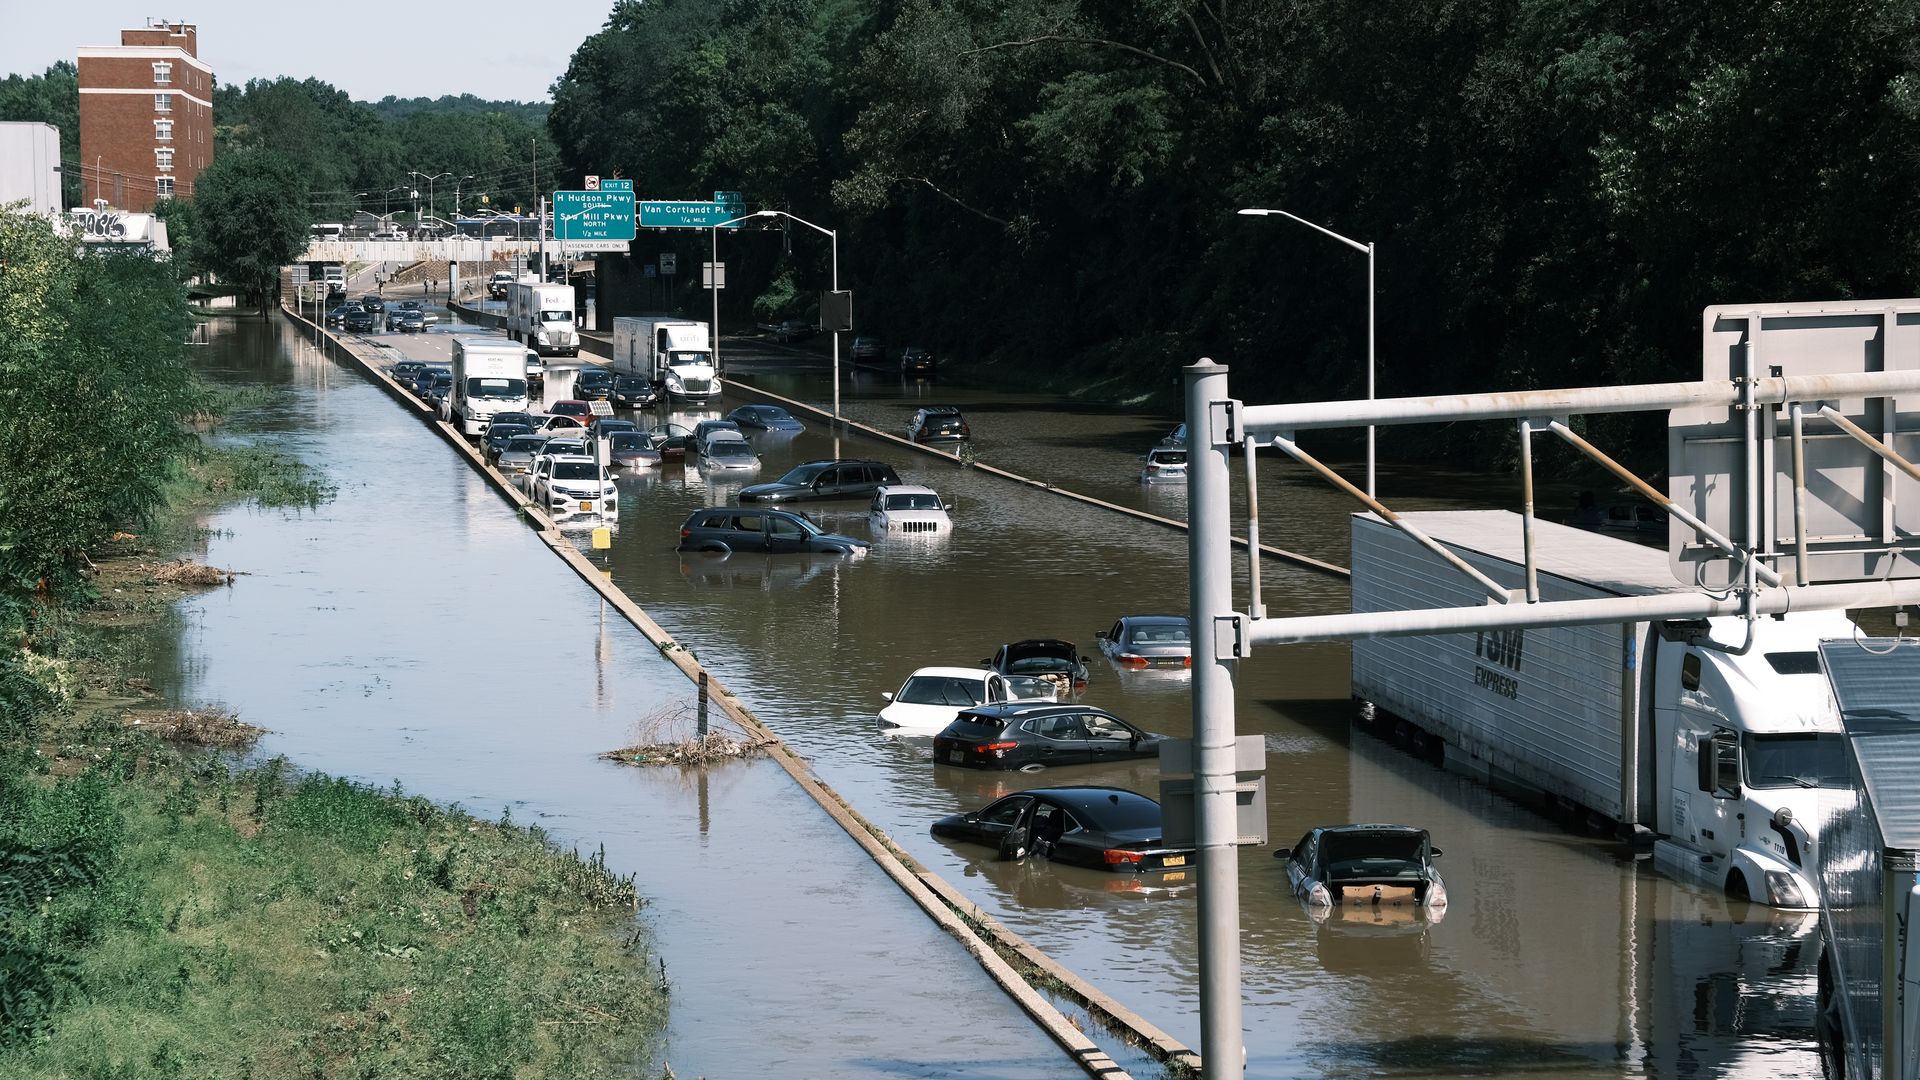 The flooded Major Deegan Expressway following a night of heavy rain from remnants of Hurricane Ida on Sept. 2, 2021, in New York City.